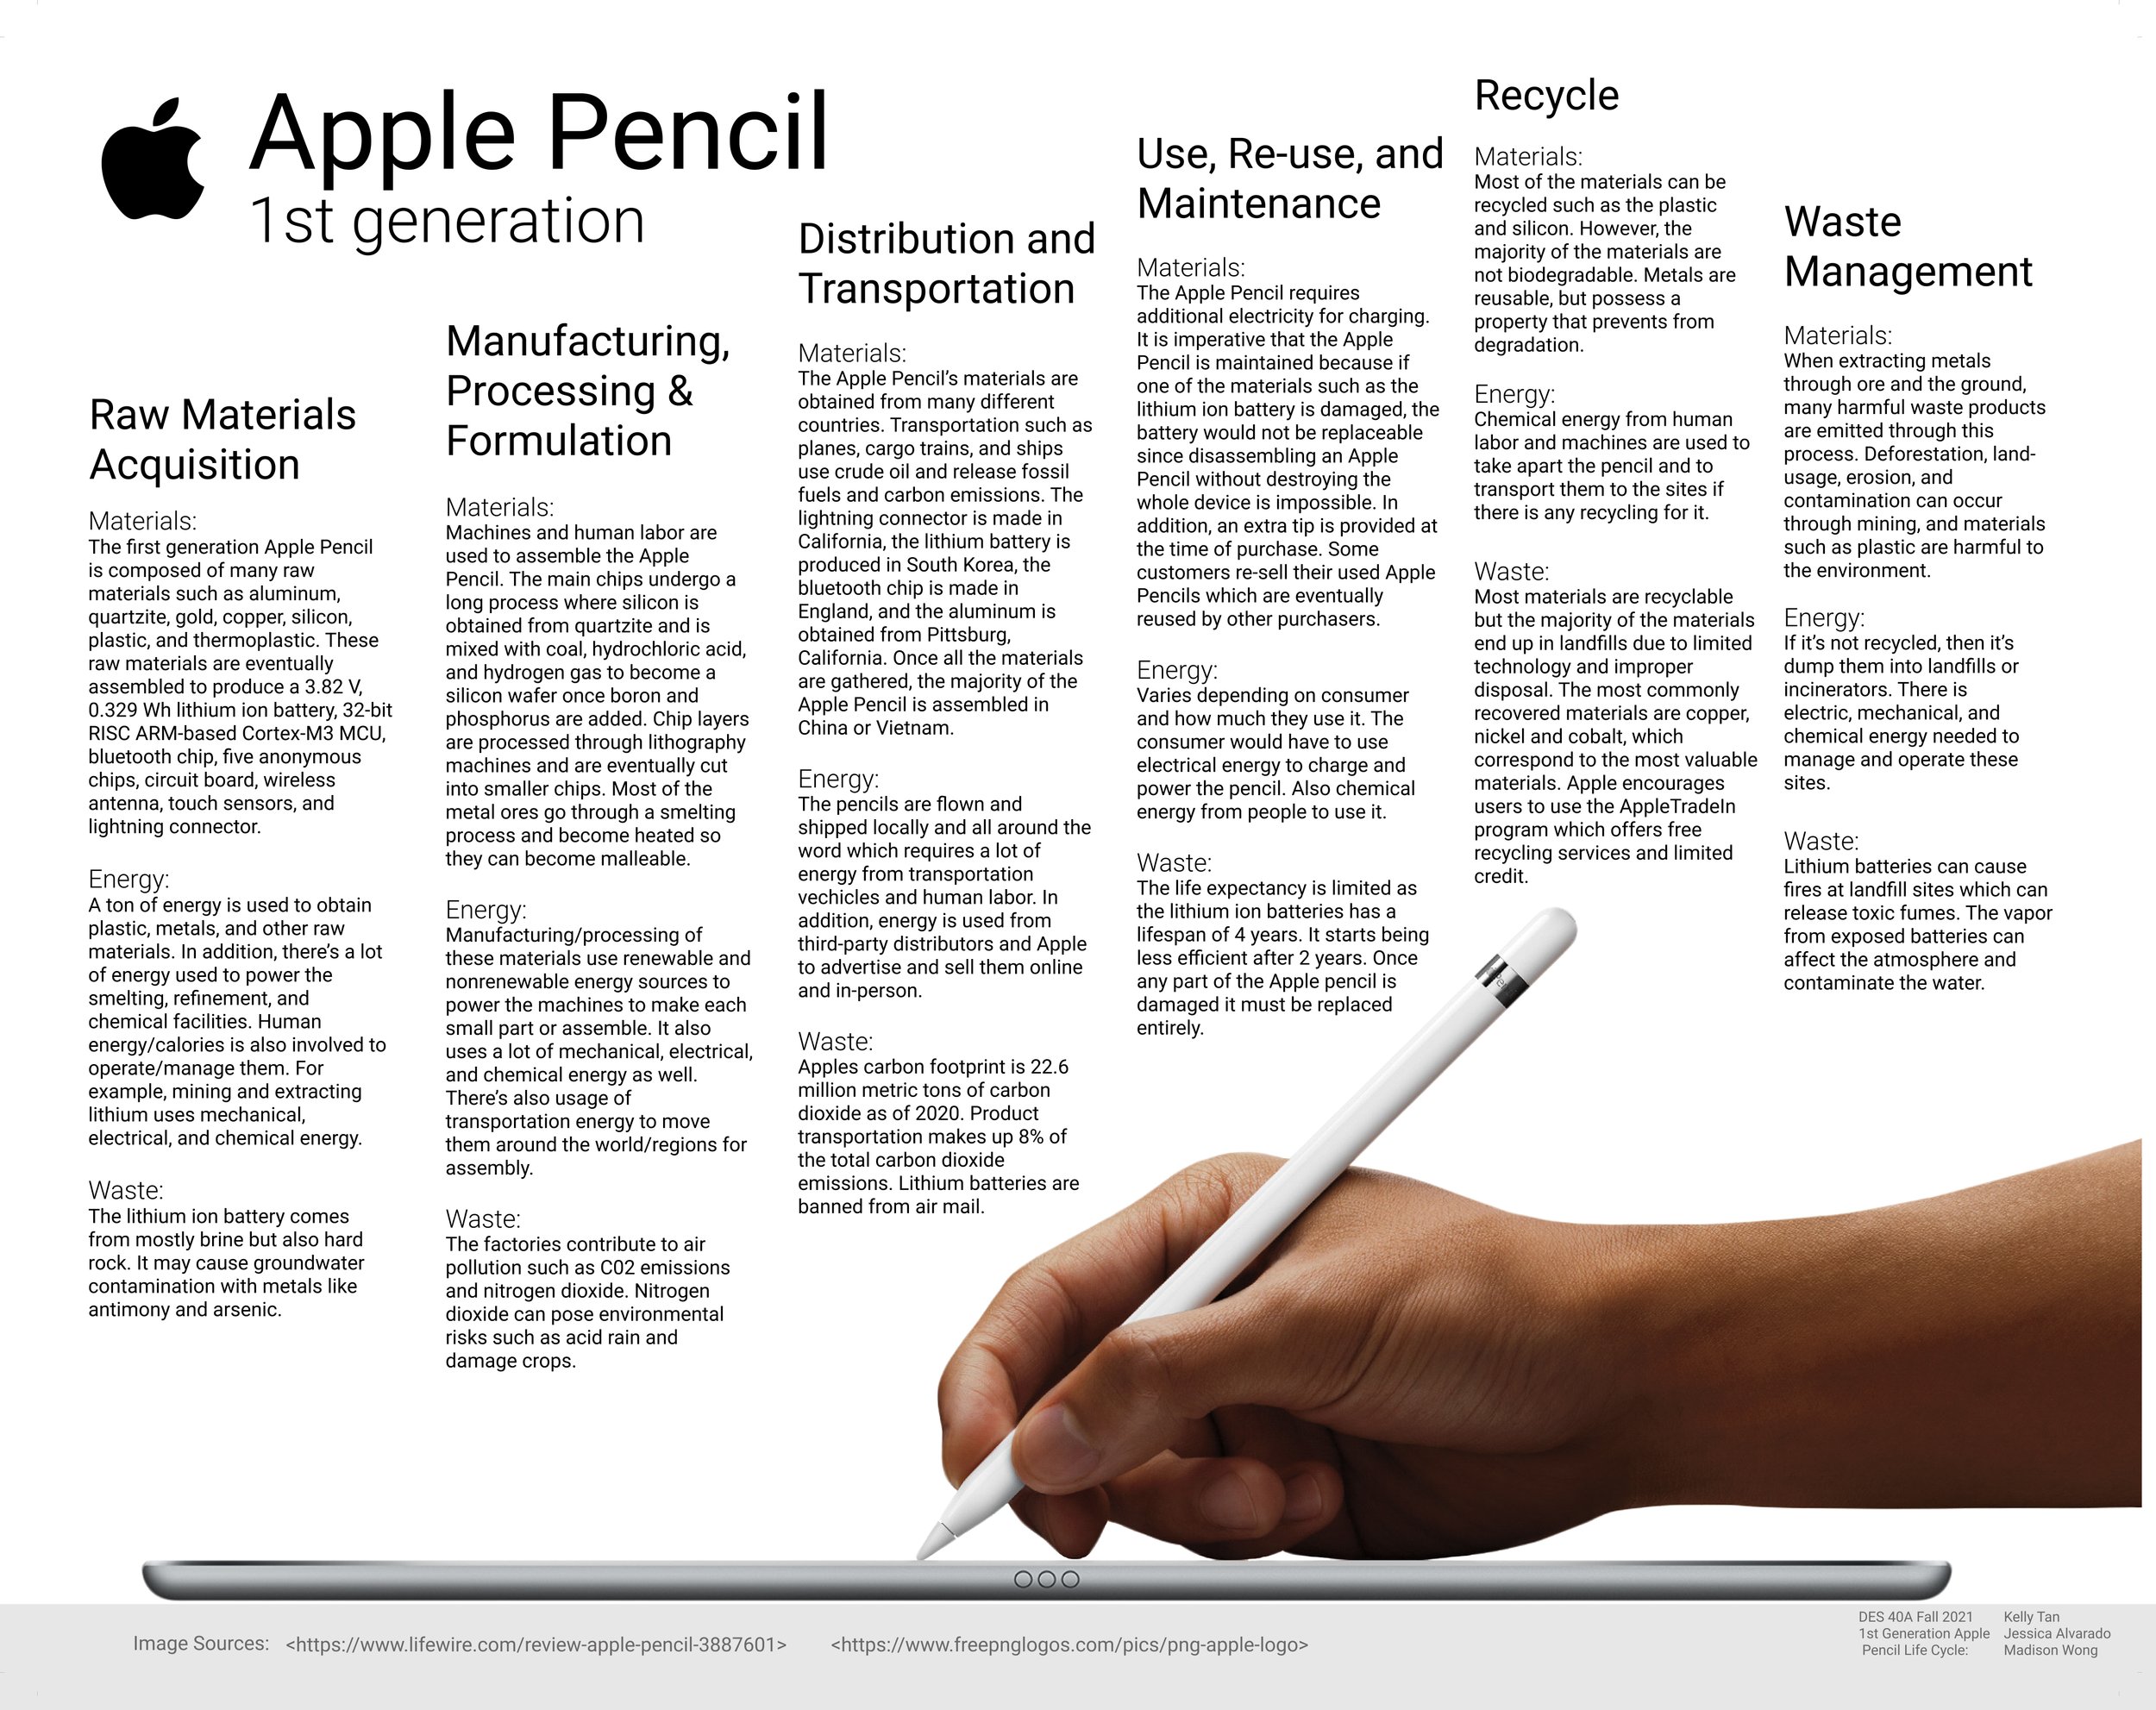 Rock Paper Pencil is the new iPad accessory I need